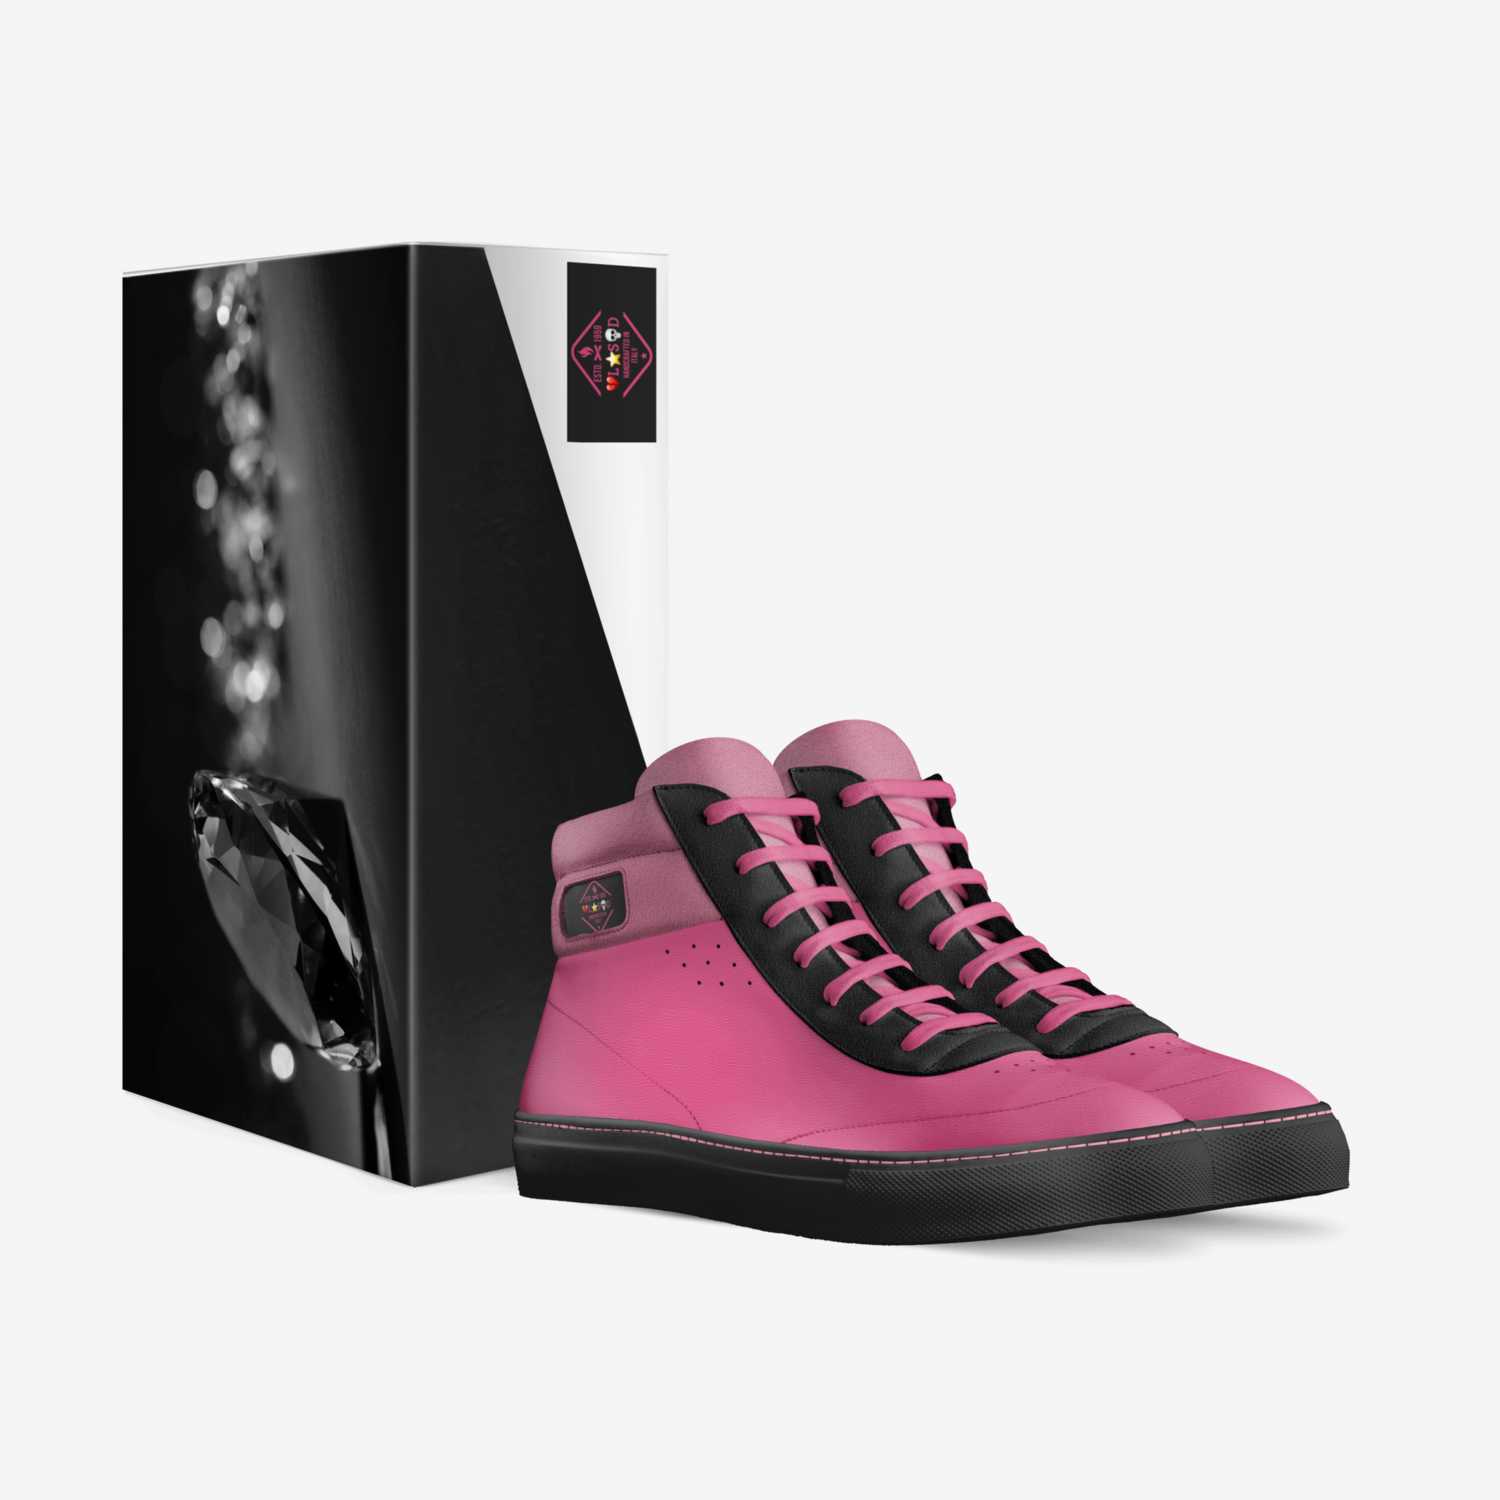 LSD Pink Panther custom made in Italy shoes by Horace Rawlings Jr | Box view